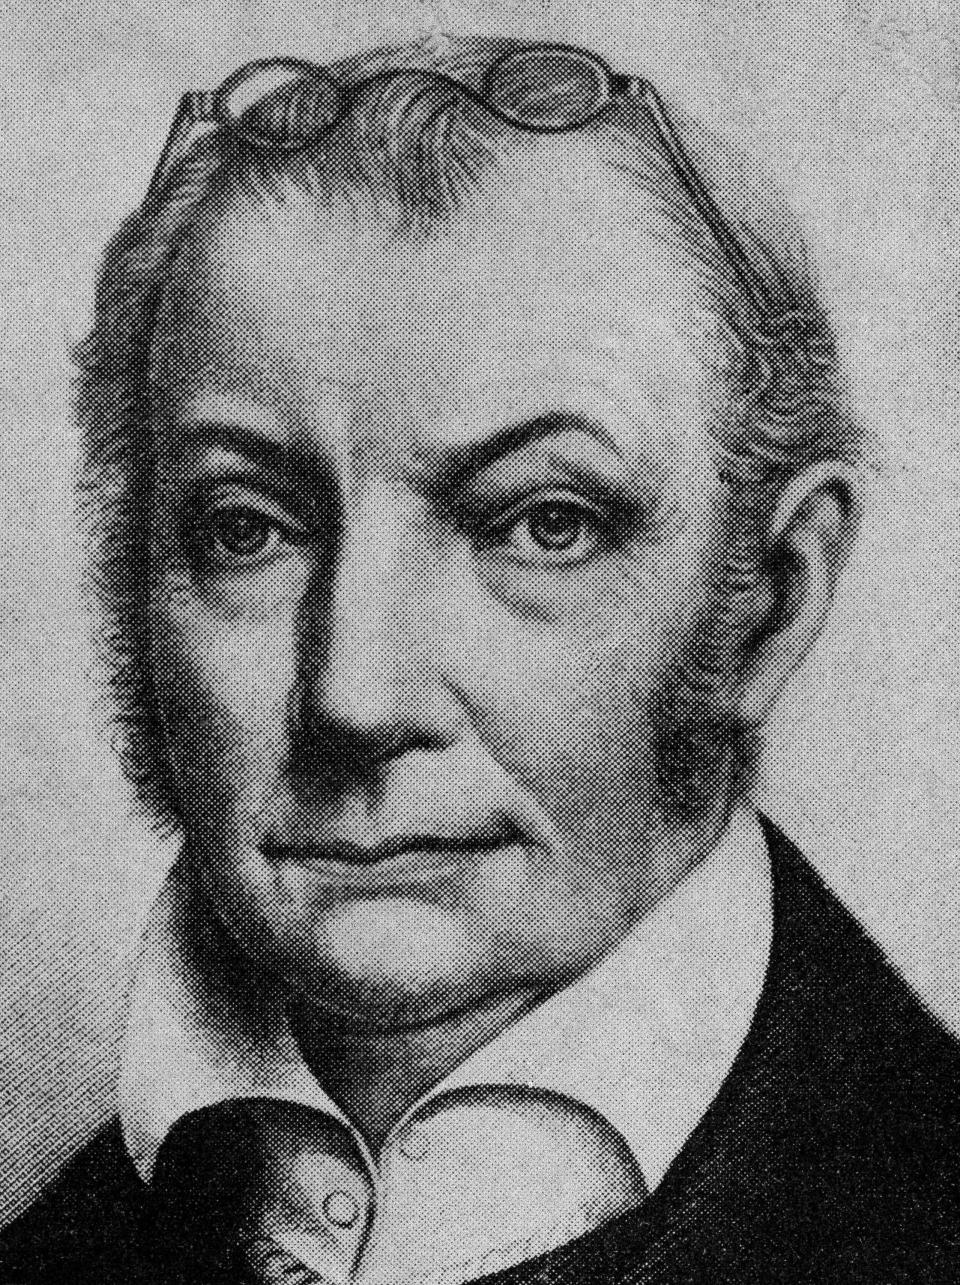 In this Oct. 4, 1956, illustration, Aaron Burr, who served as Thomas Jefferson's vice president, is shown. Burr was indicted for murder in the duel slaying of Alexander Hamilton and later for treason in a plot to seize the new Louisiana Territory. Sedition and treason cases have been rare in U.S. history. But after after Trump supporters stormed Capitol Hill on Jan. 6, many described their behavior as seditious, even treasonous. (AP Photo)